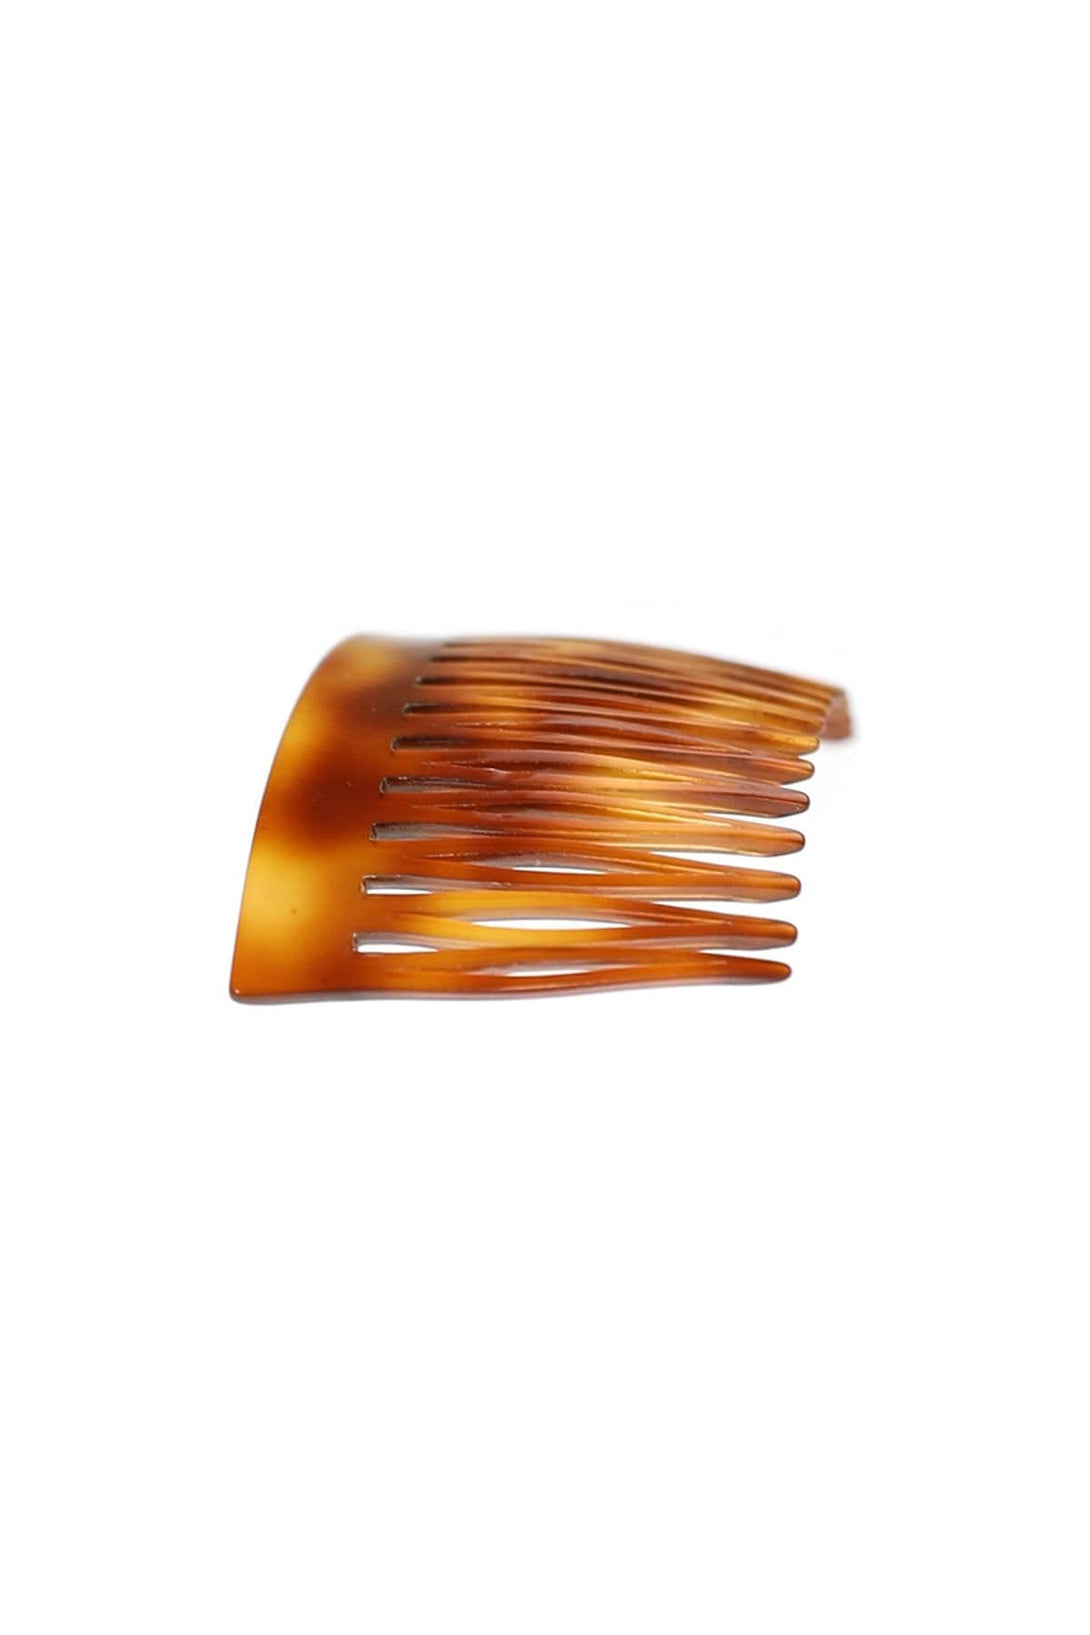 Vintage French Tortoise Shell Curved Hair Comb